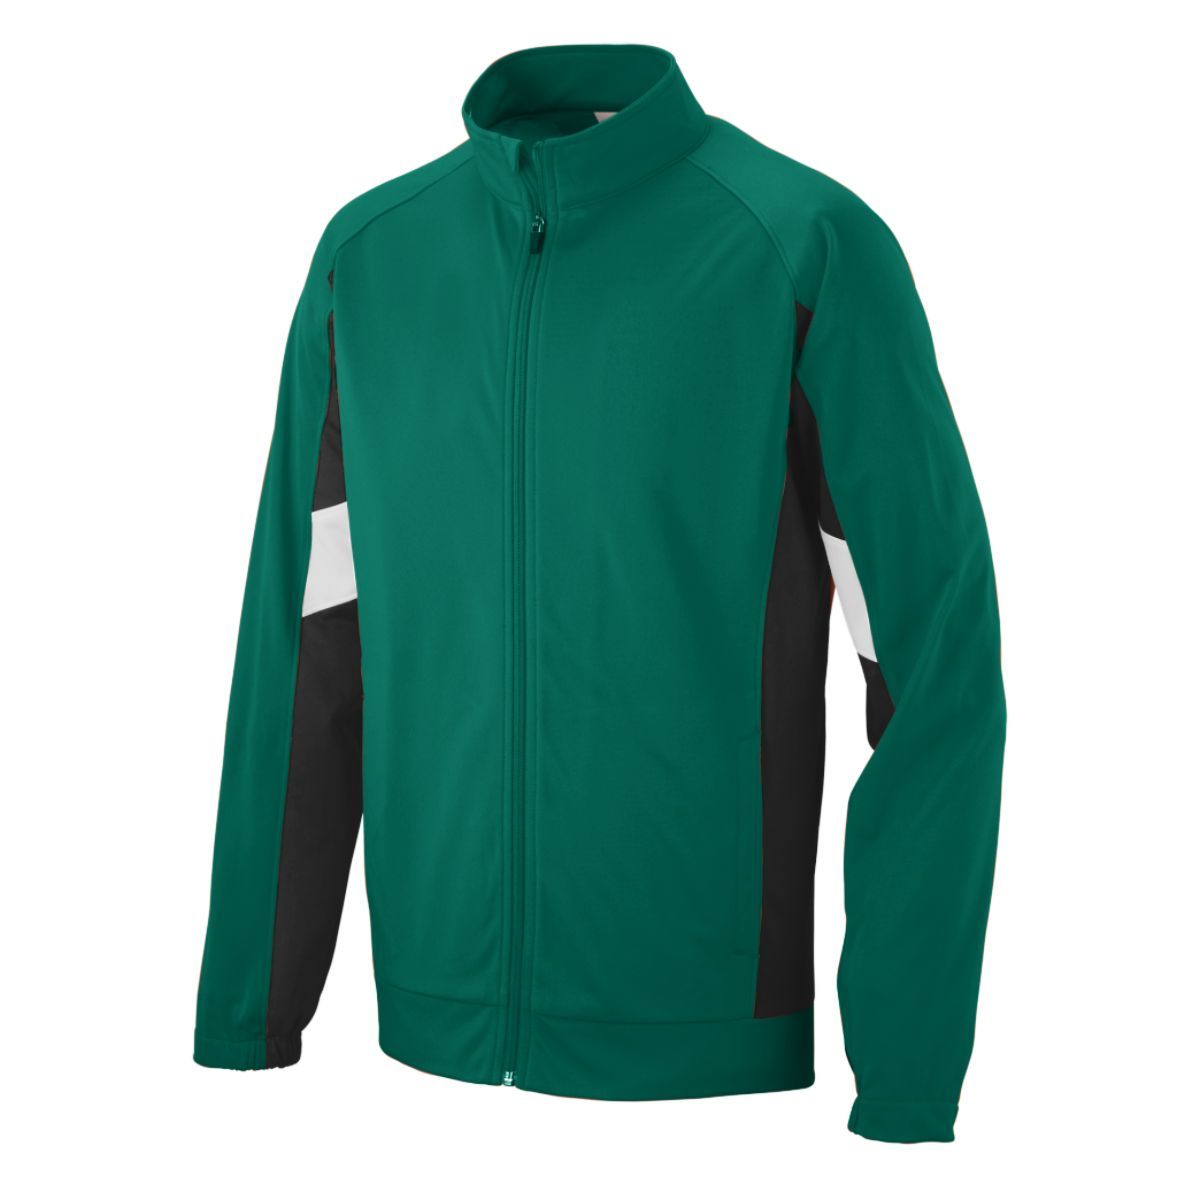 Augusta Sportswear Youth Tour De Force Jacket in Dark Green/Black/White  -Part of the Youth, Youth-Jacket, Augusta-Products, Outerwear product lines at KanaleyCreations.com